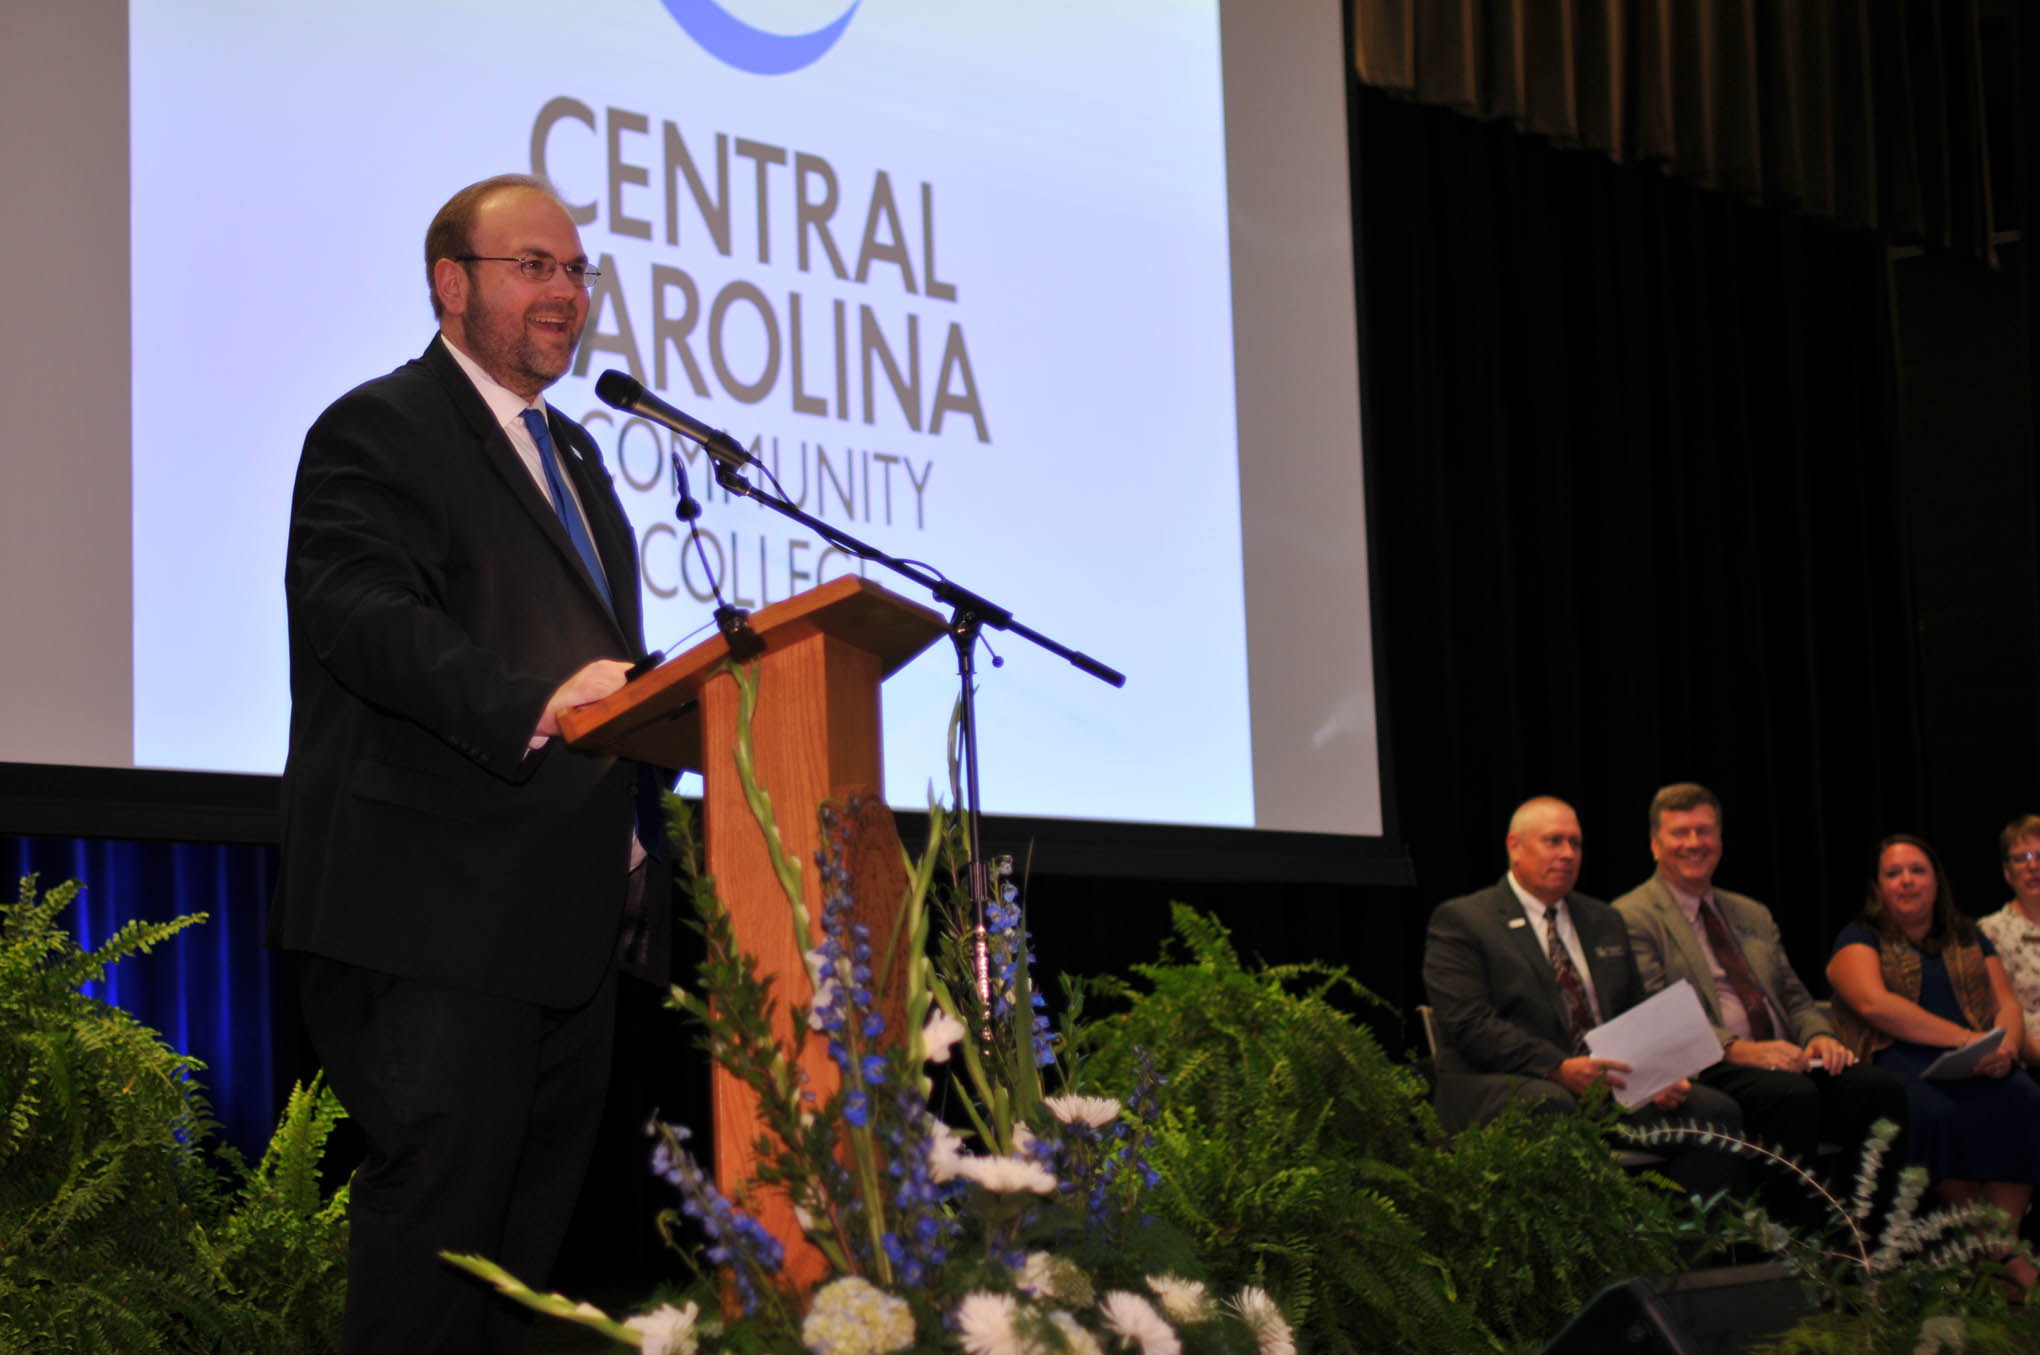 CCCC announces awards during Convocation event